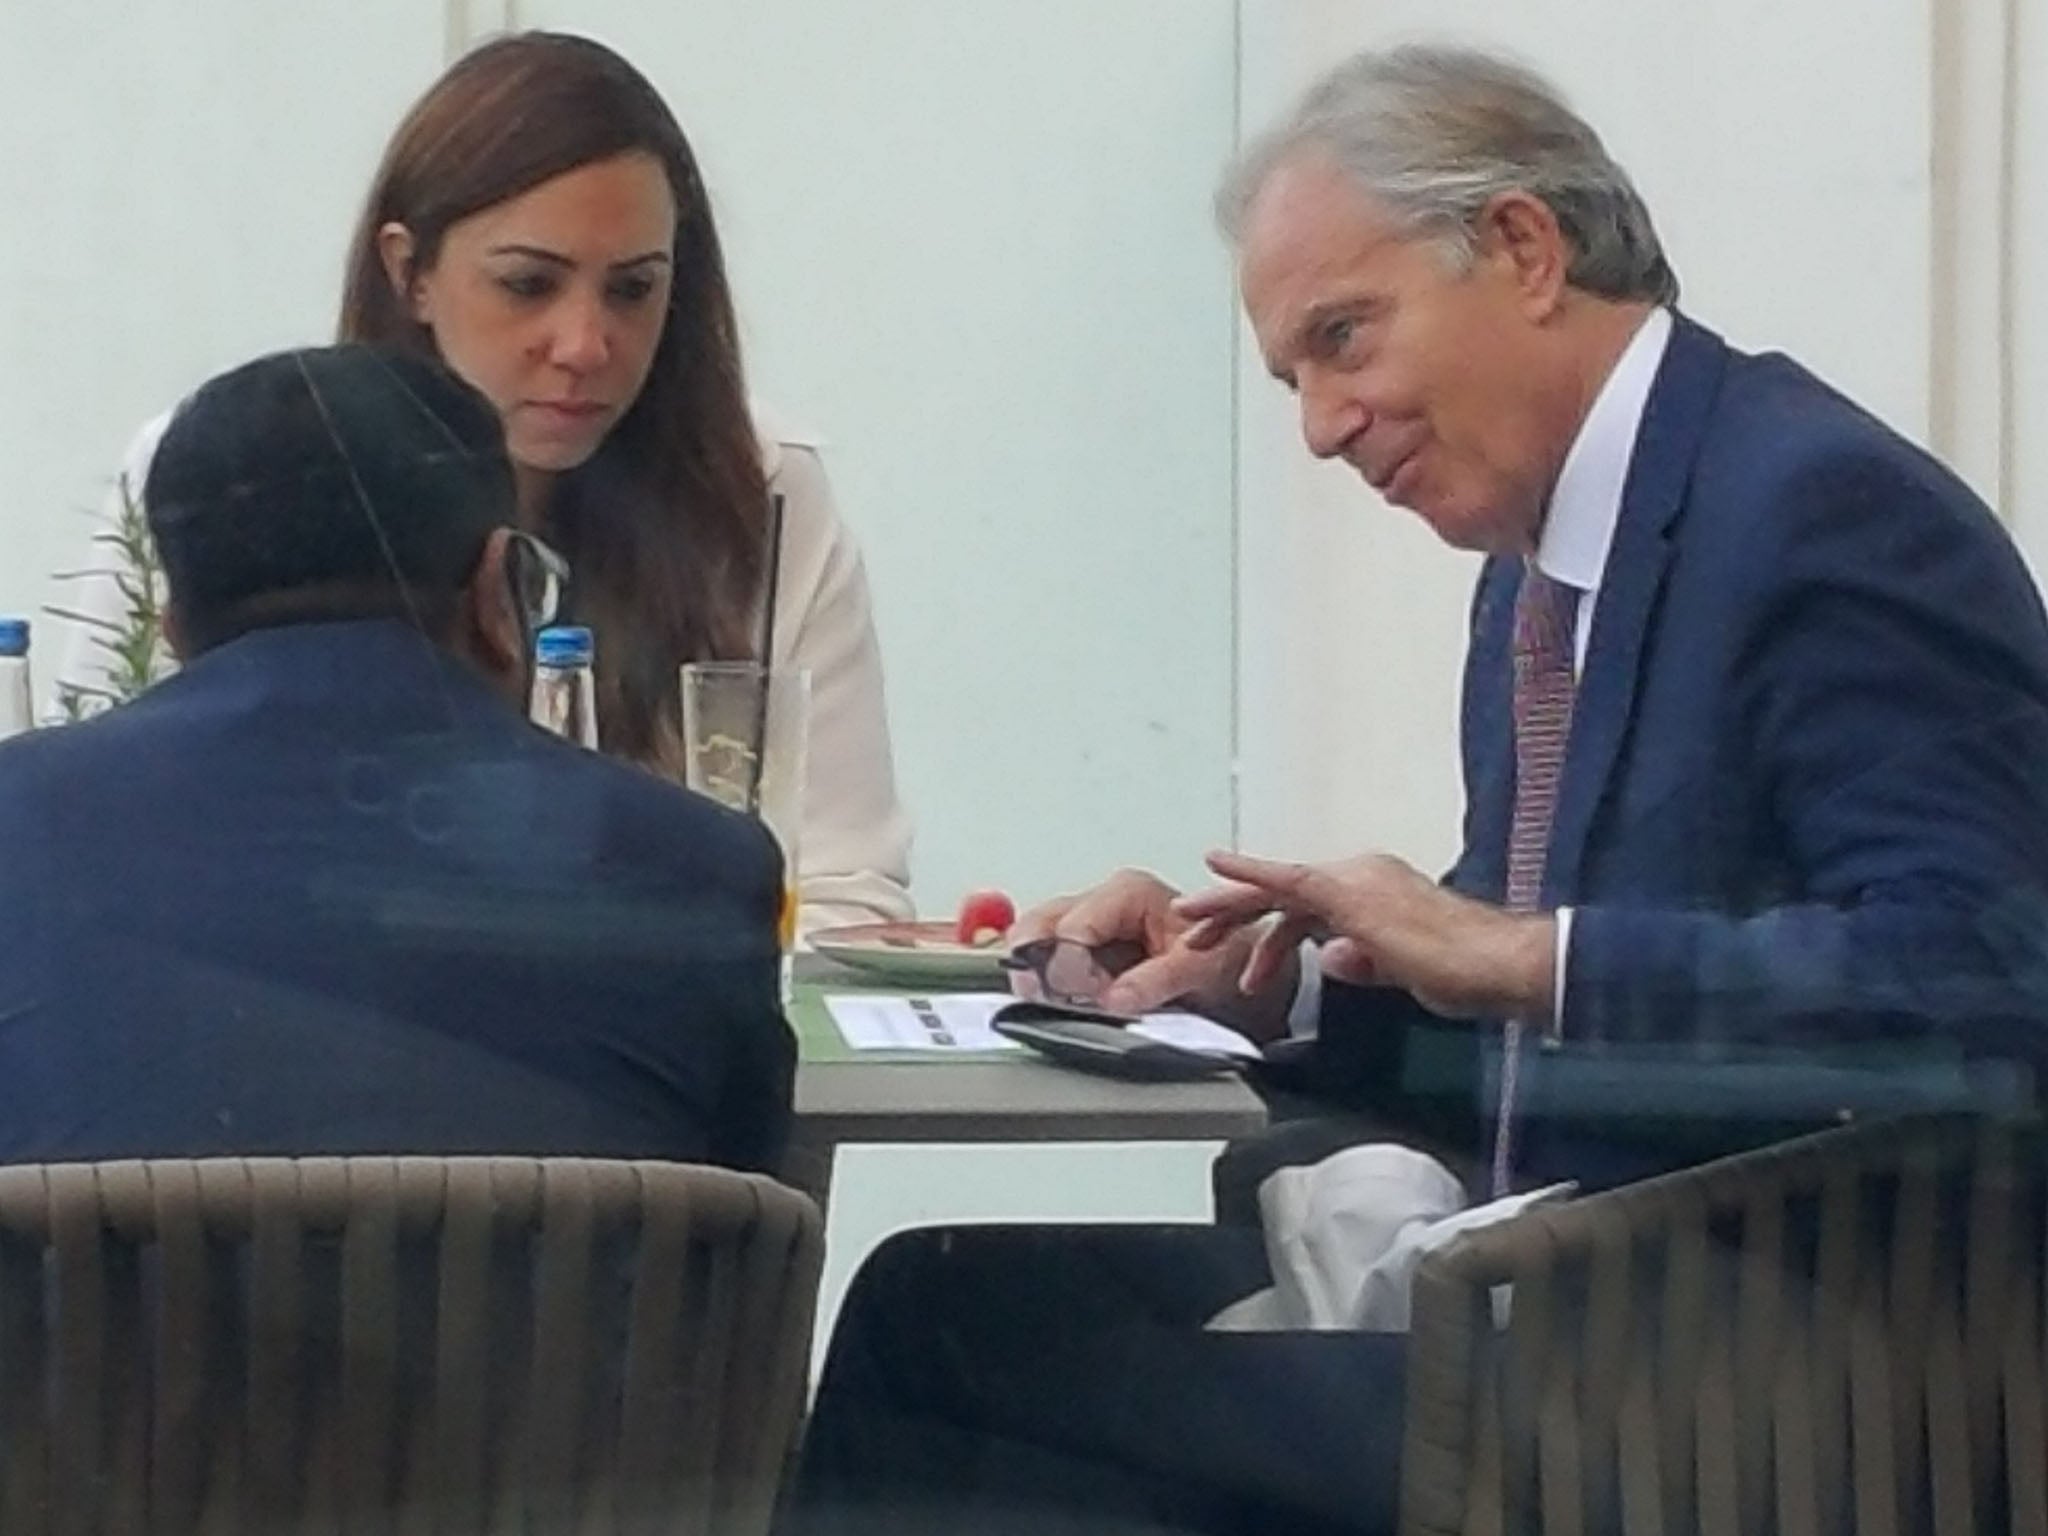 Tony Blair was spotted by Robert Fisk in Belgrade